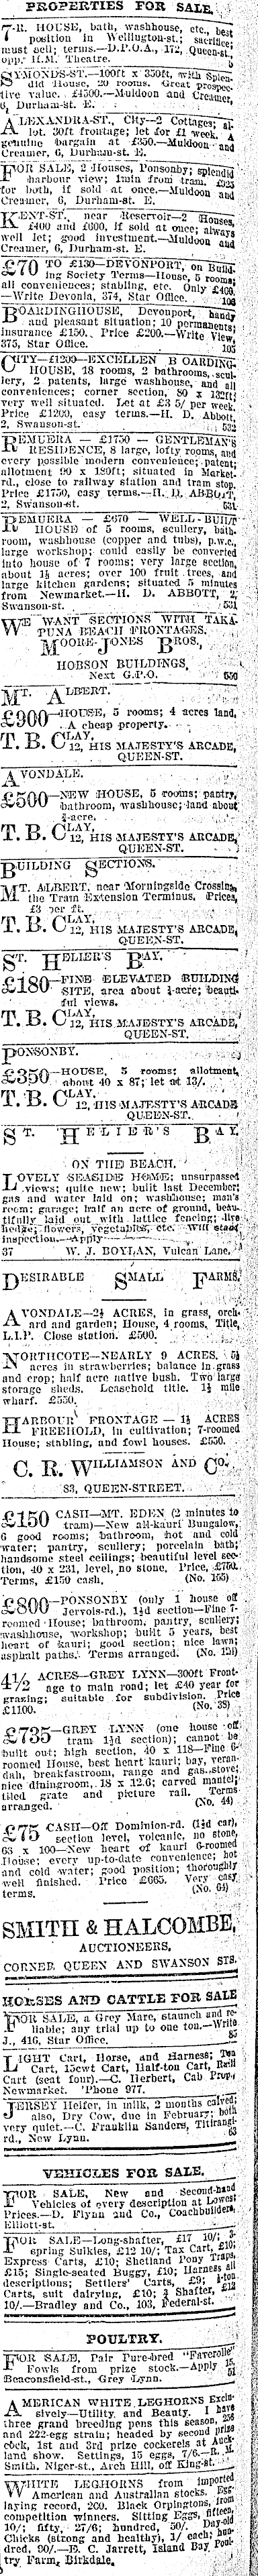 Papers Past Newspapers Auckland Star 11 October 1911 Page 6 Advertisements Column 9